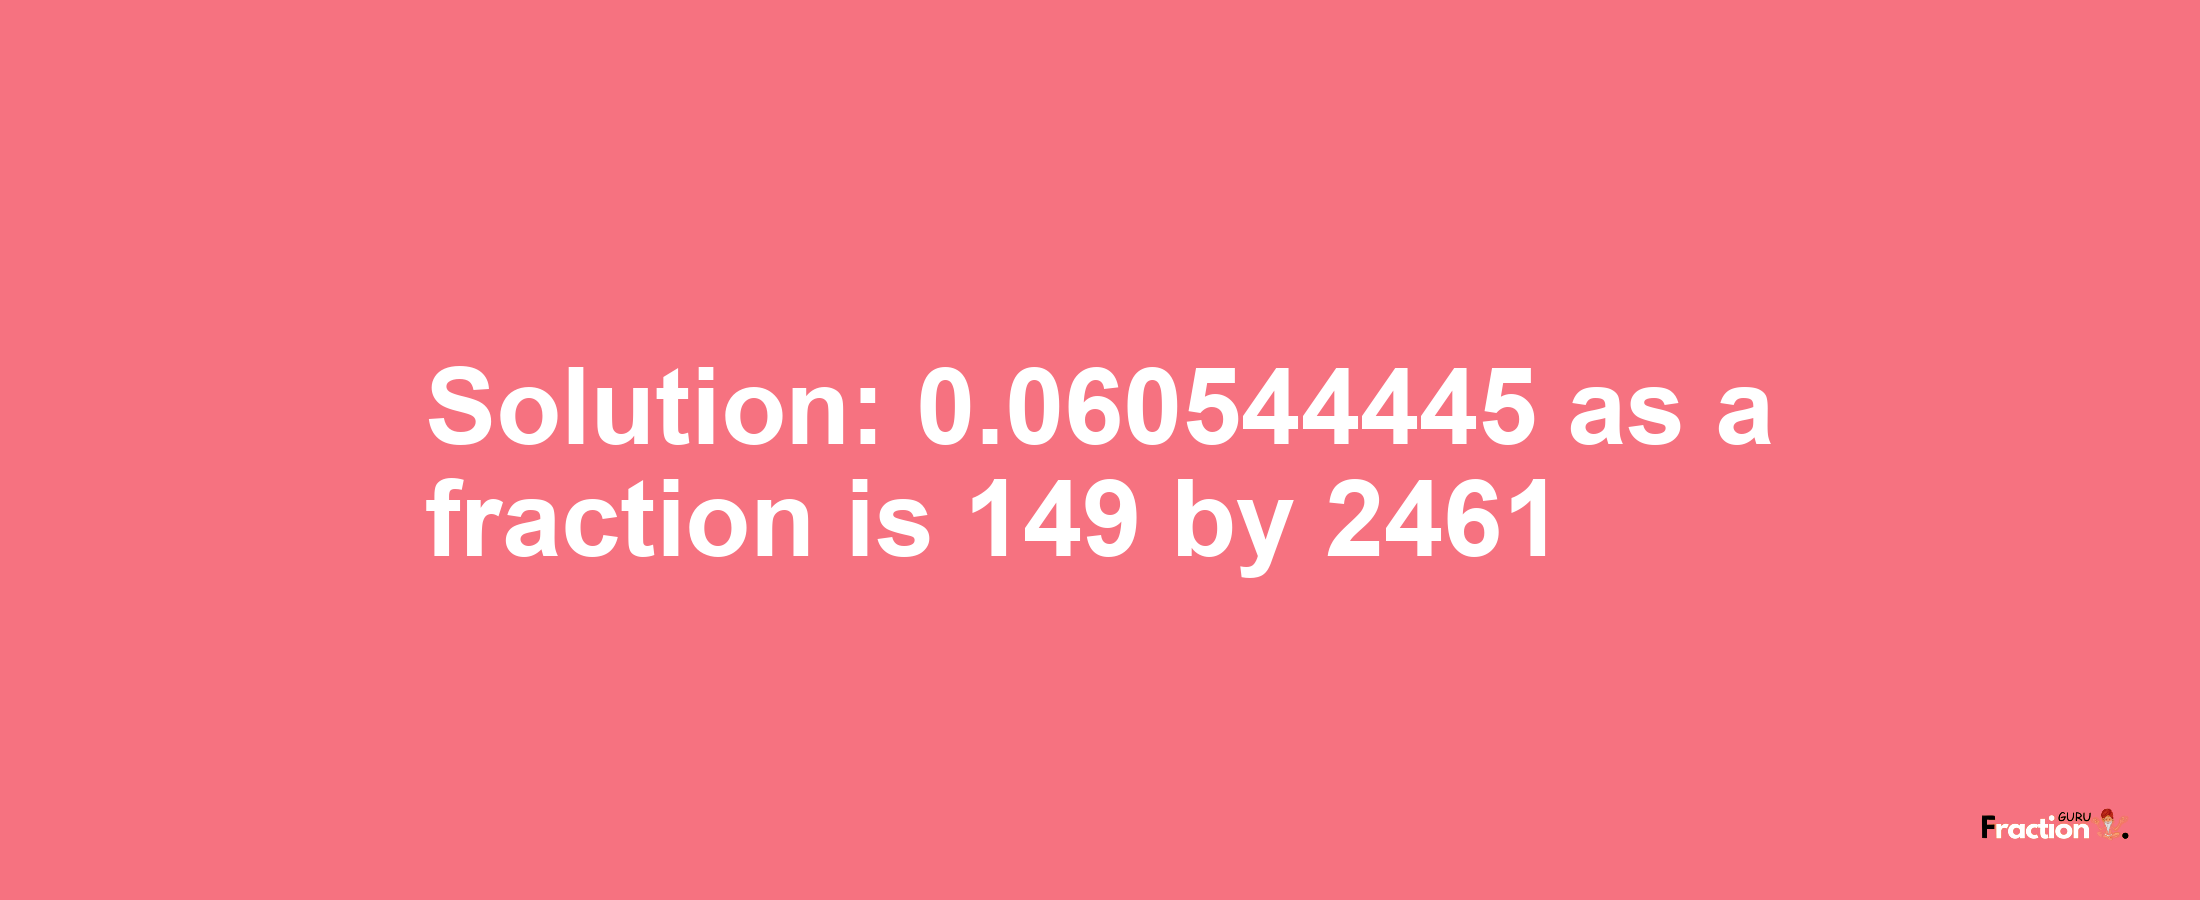 Solution:0.060544445 as a fraction is 149/2461